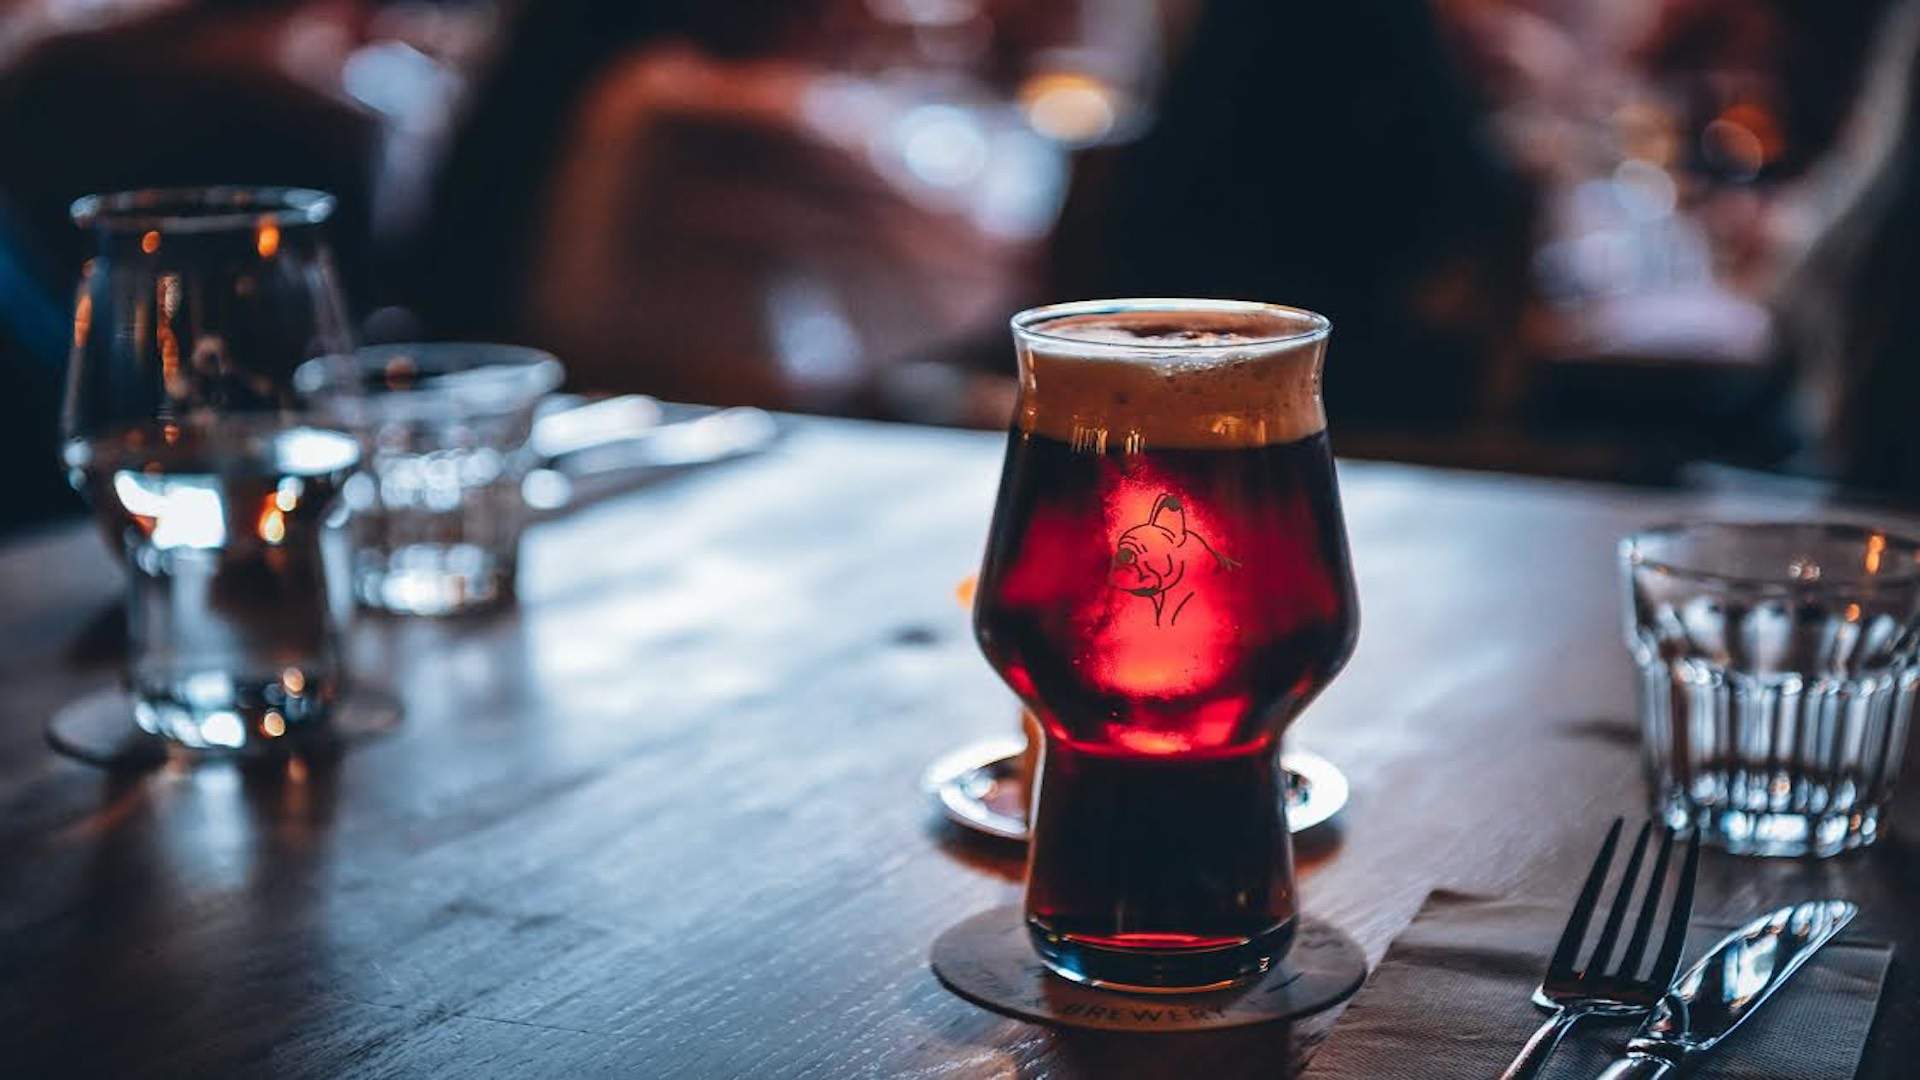 Ten Deliciously Dark Beers to Get You Through the Wintry Months